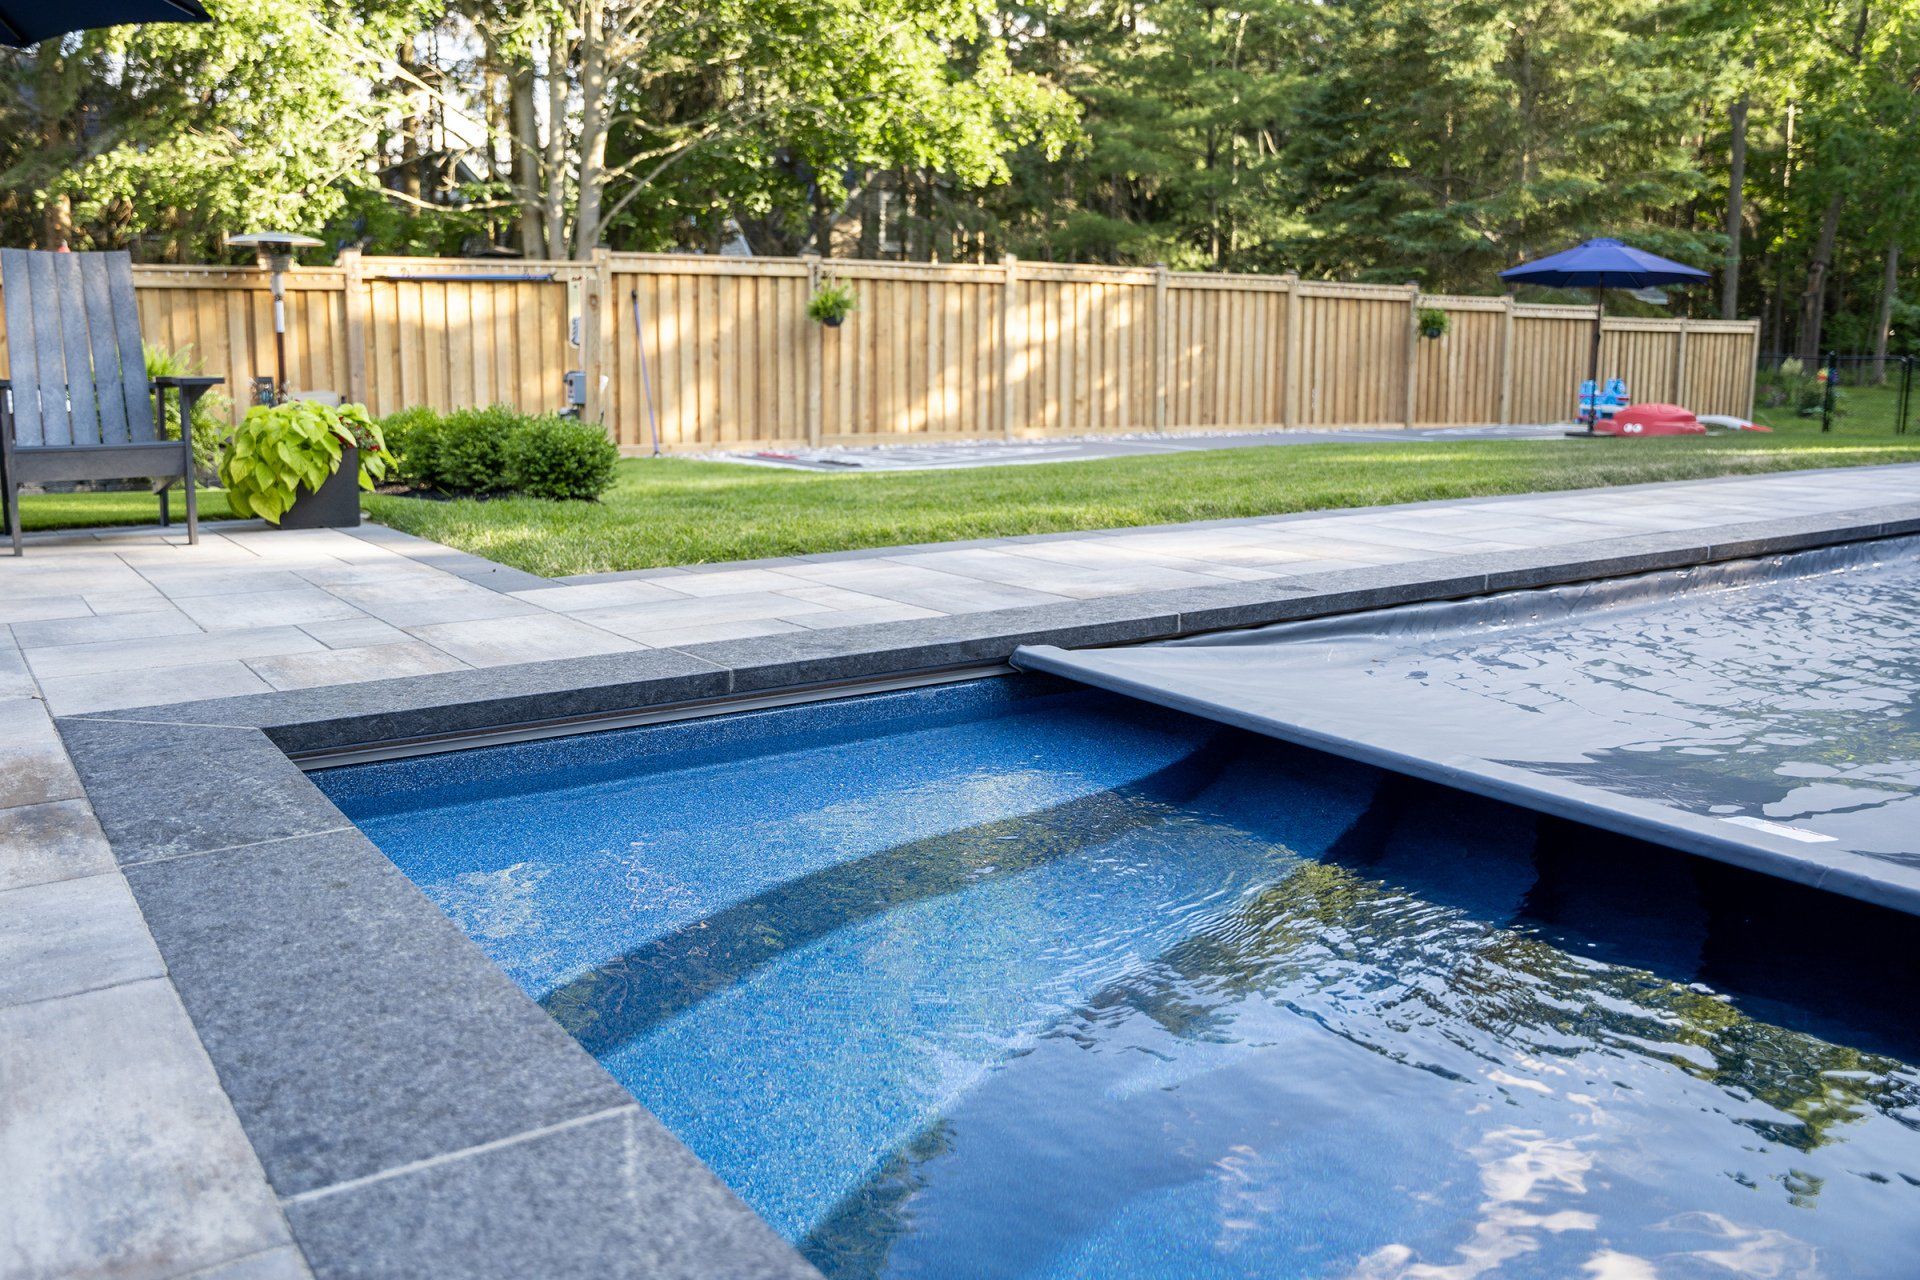 How pools and landscaping add value to your home